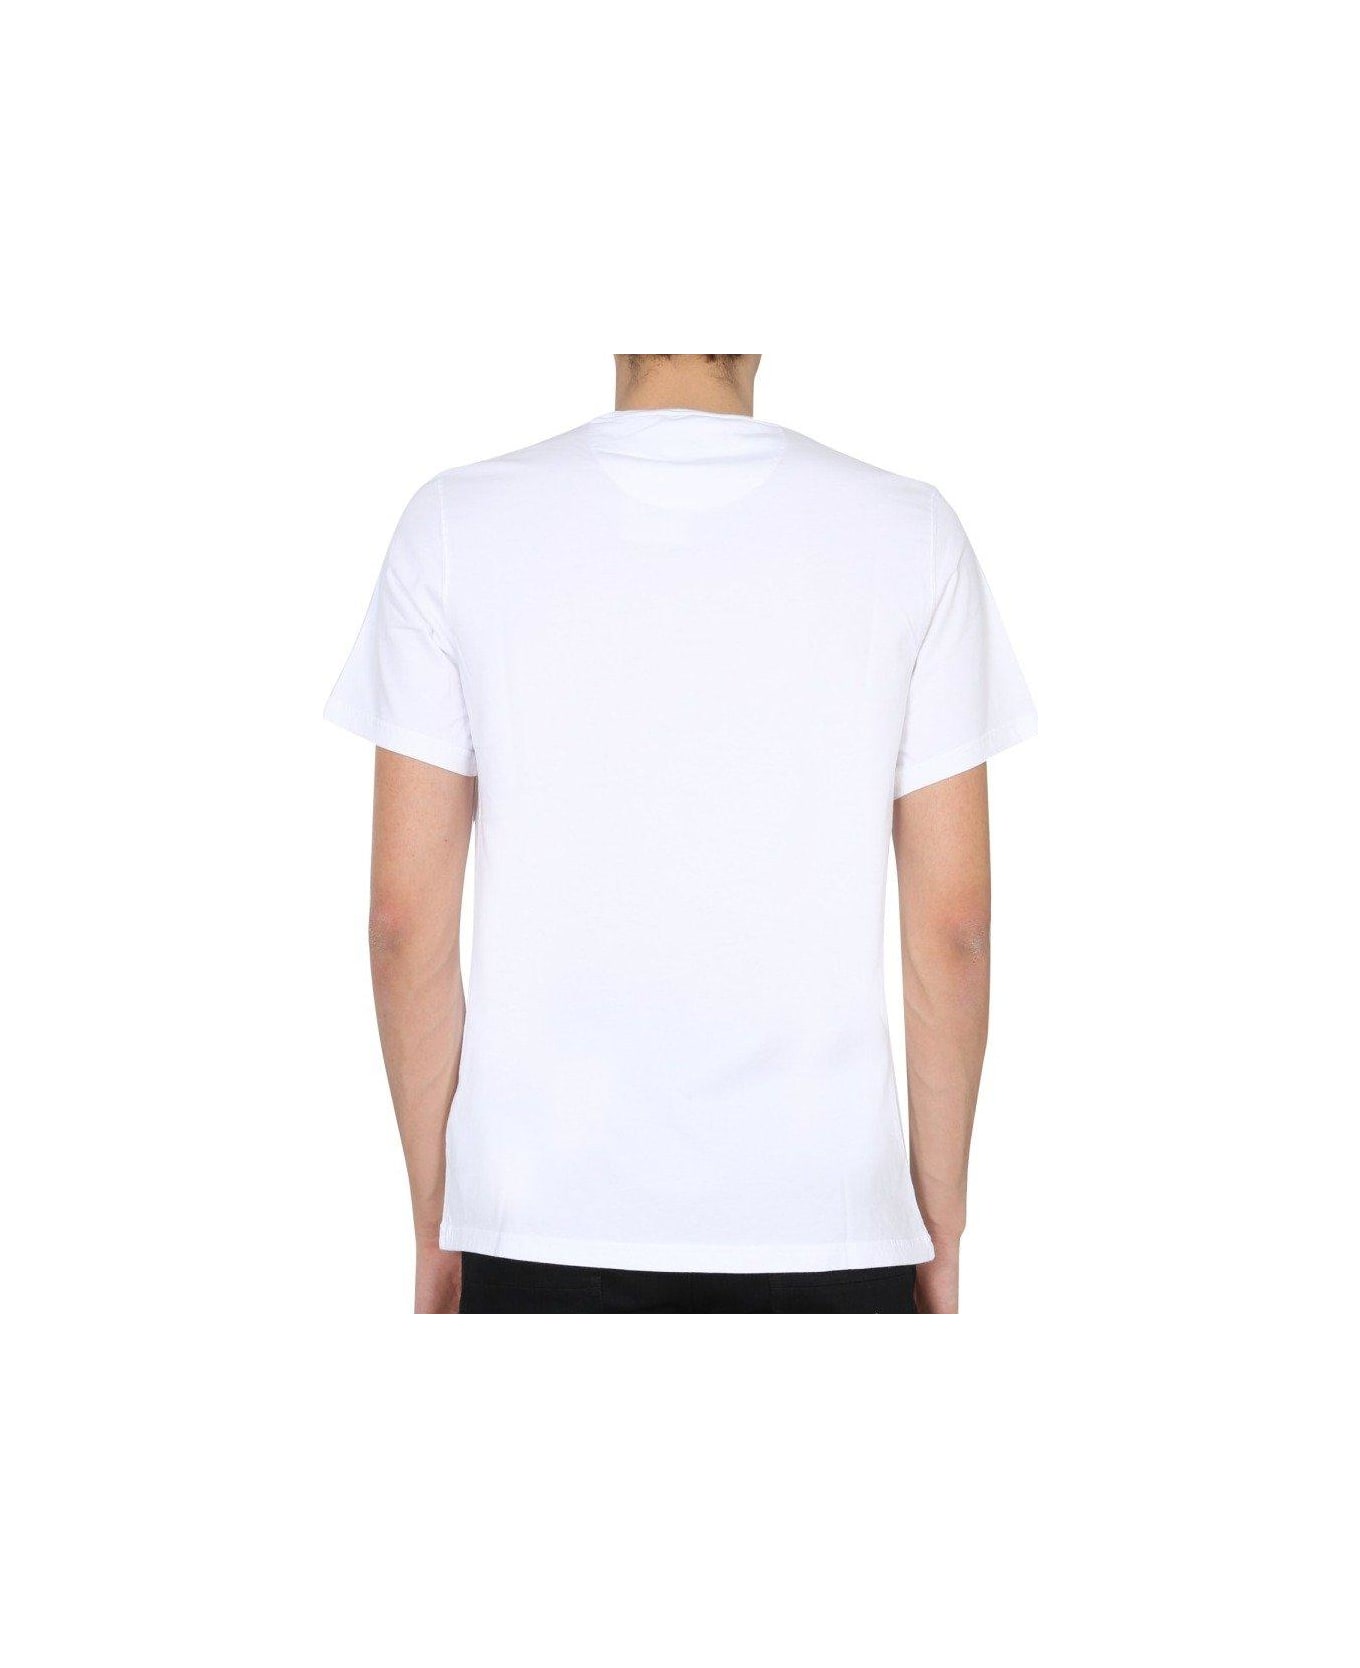 Barbour Embroidered T-shirt - White シャツ